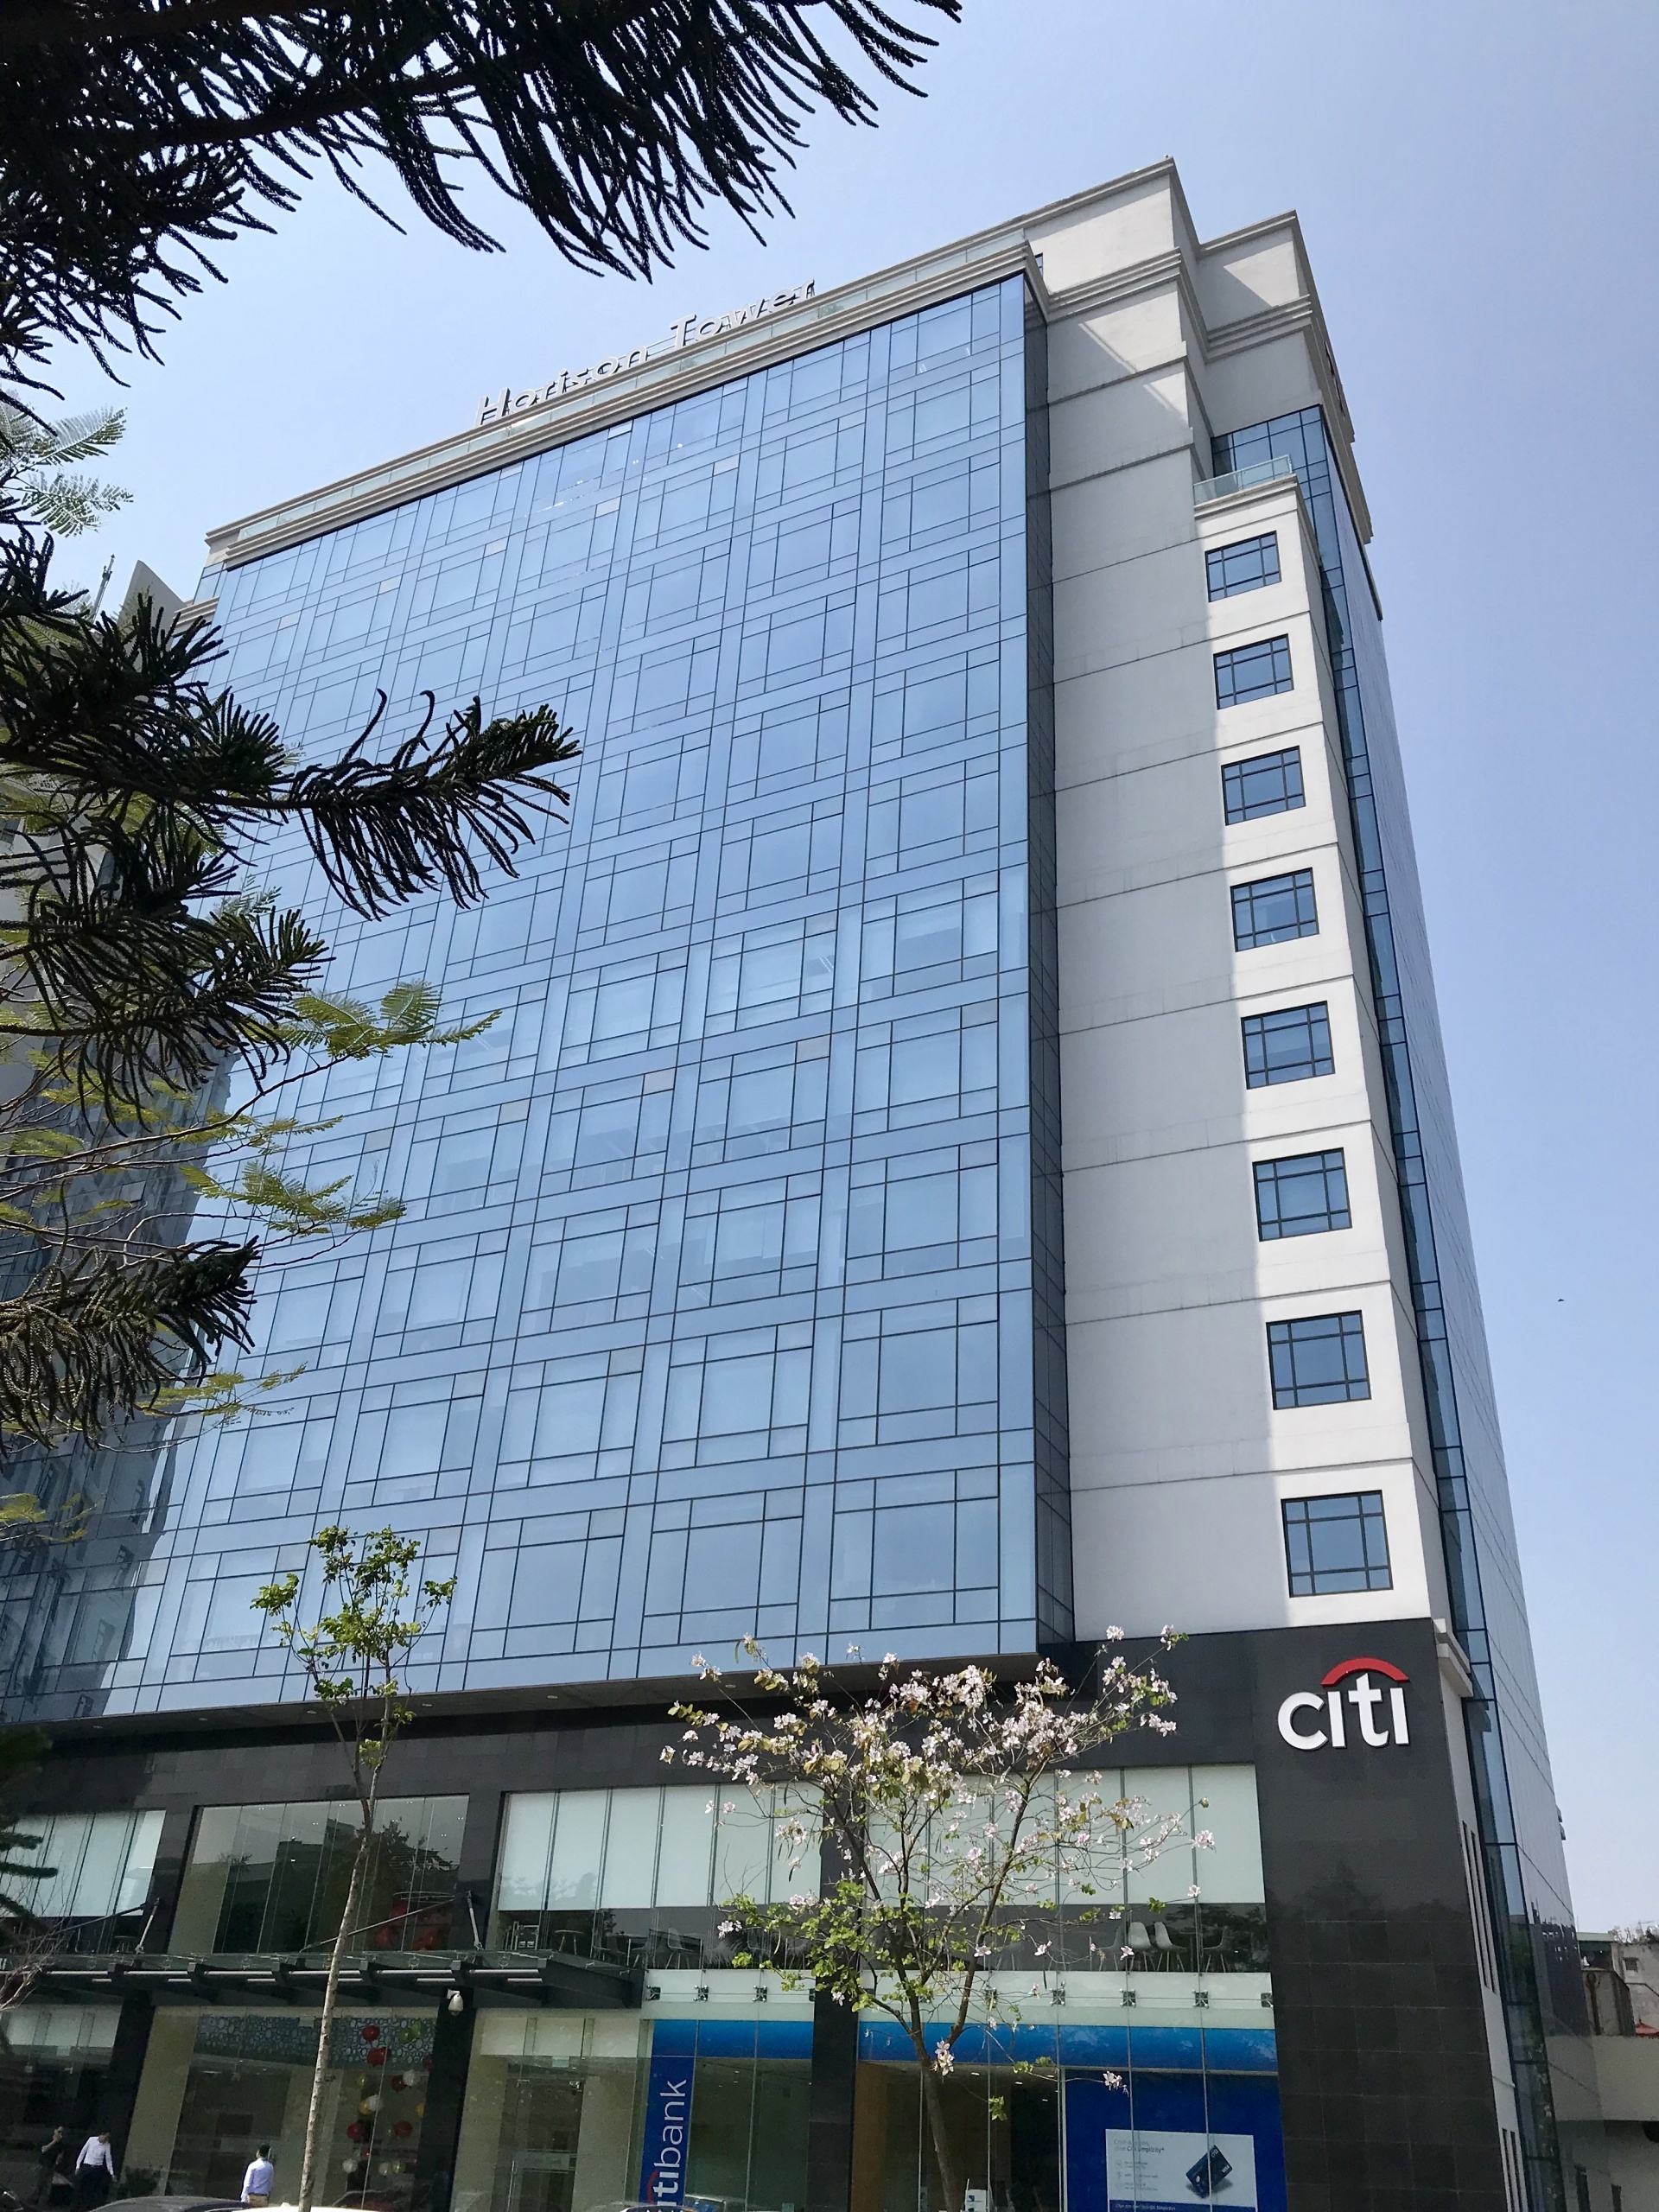 Global Finance named Citi Best Corporate Digital Bank in Asia-Pacific